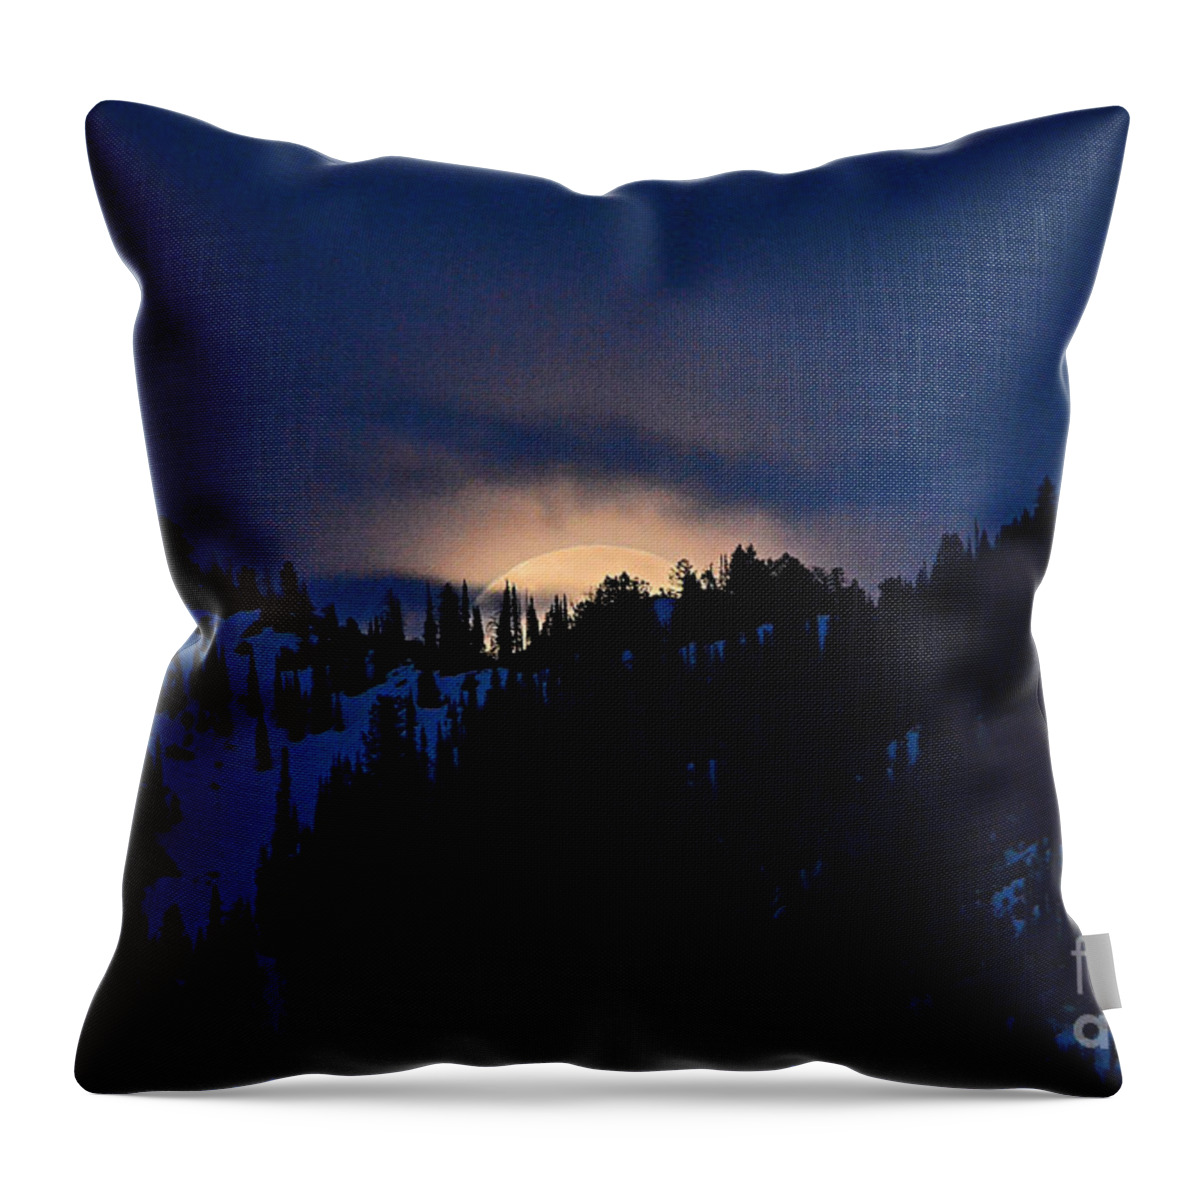 Full Moon Throw Pillow featuring the photograph Full Flower Moon #3 by Dorrene BrownButterfield